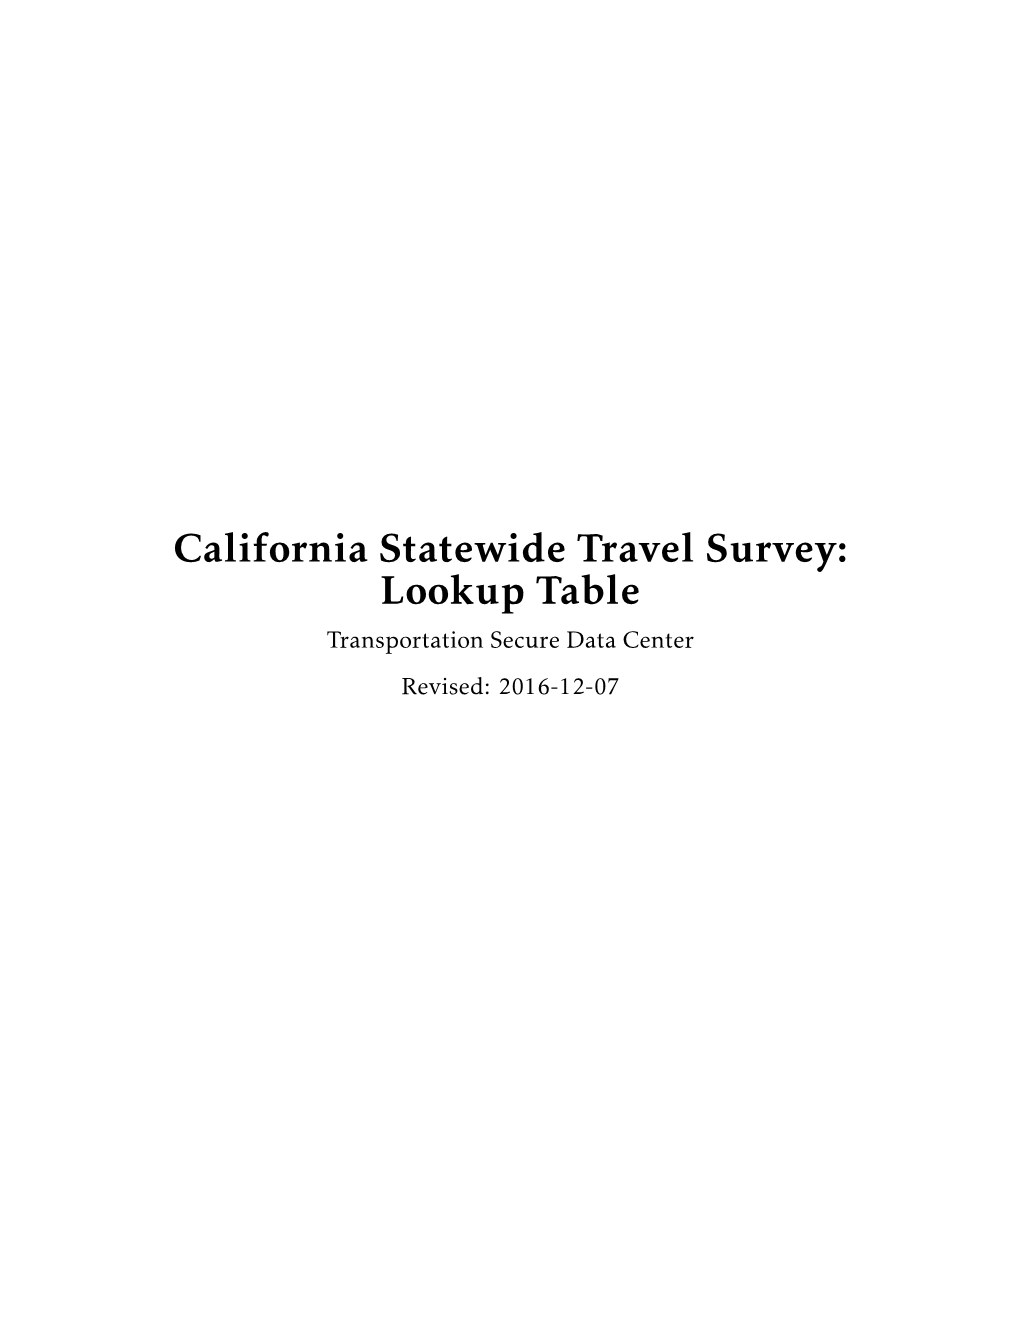 California Statewide Travel Survey: Lookup Table Transportation Secure Data Center Revised: 2016-12-07 Summary Statistics